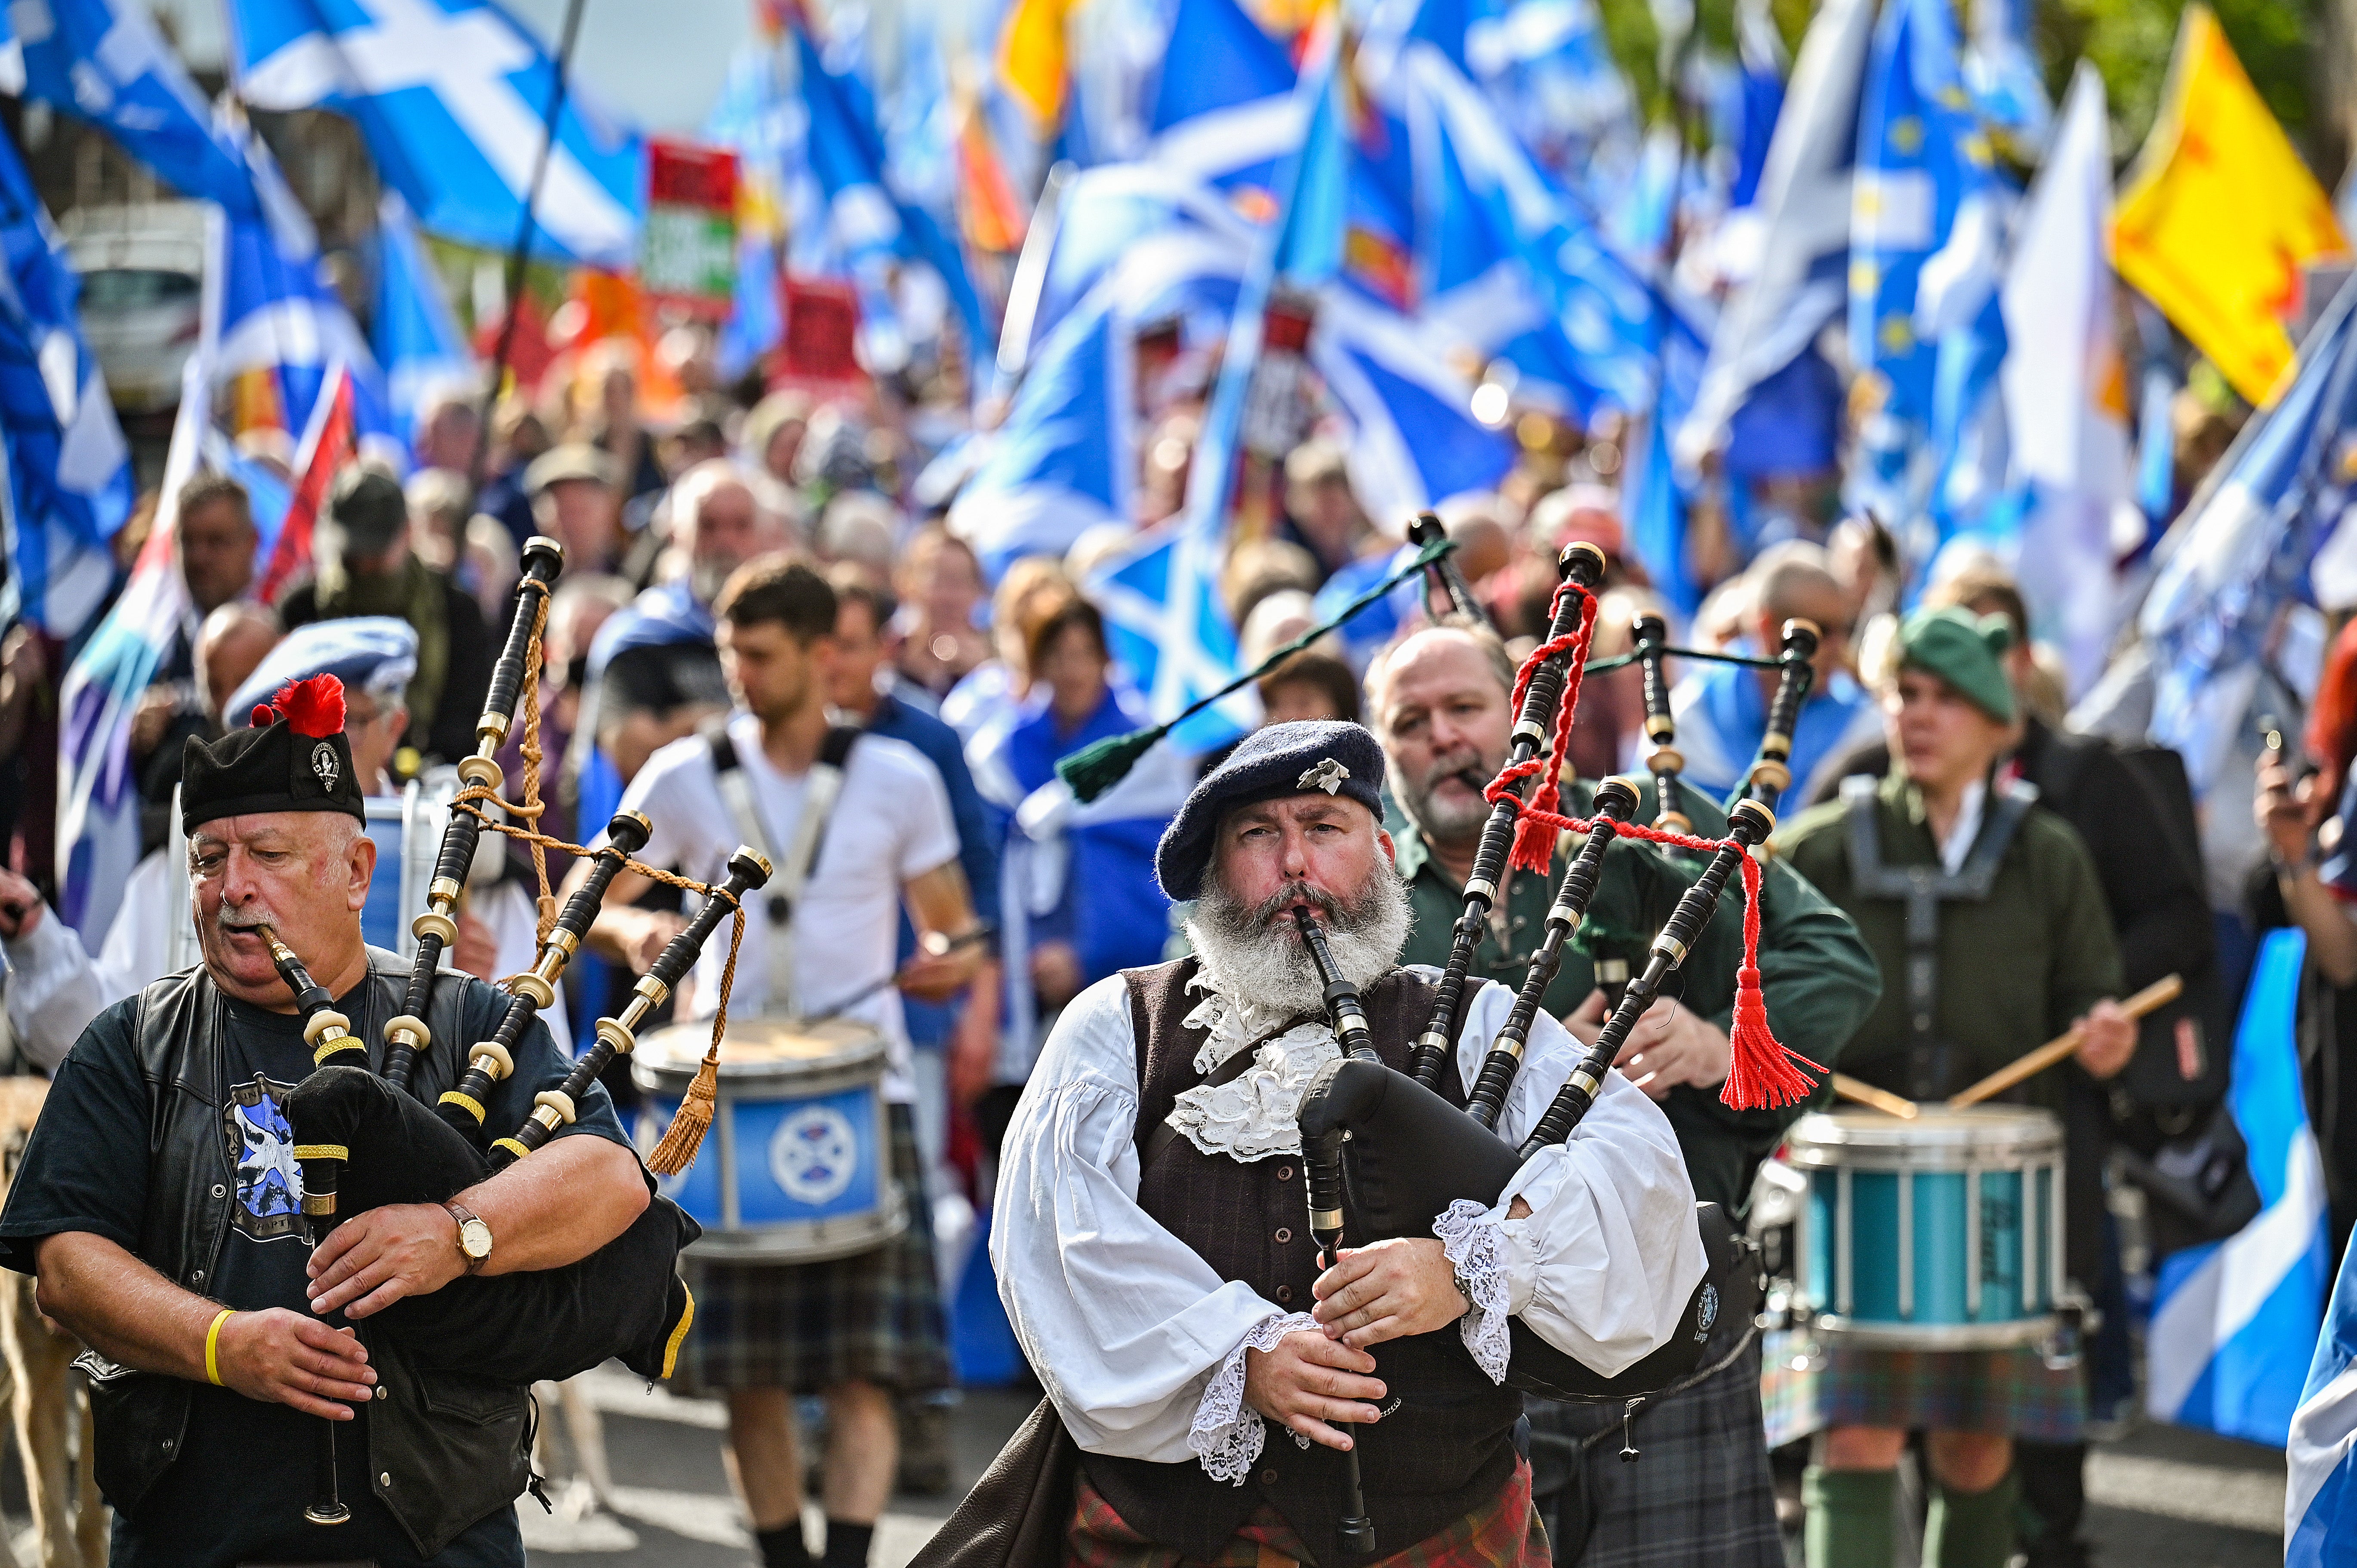 Supporters of Scottish independence hold a march outside the Scottish parliament in Edinburgh